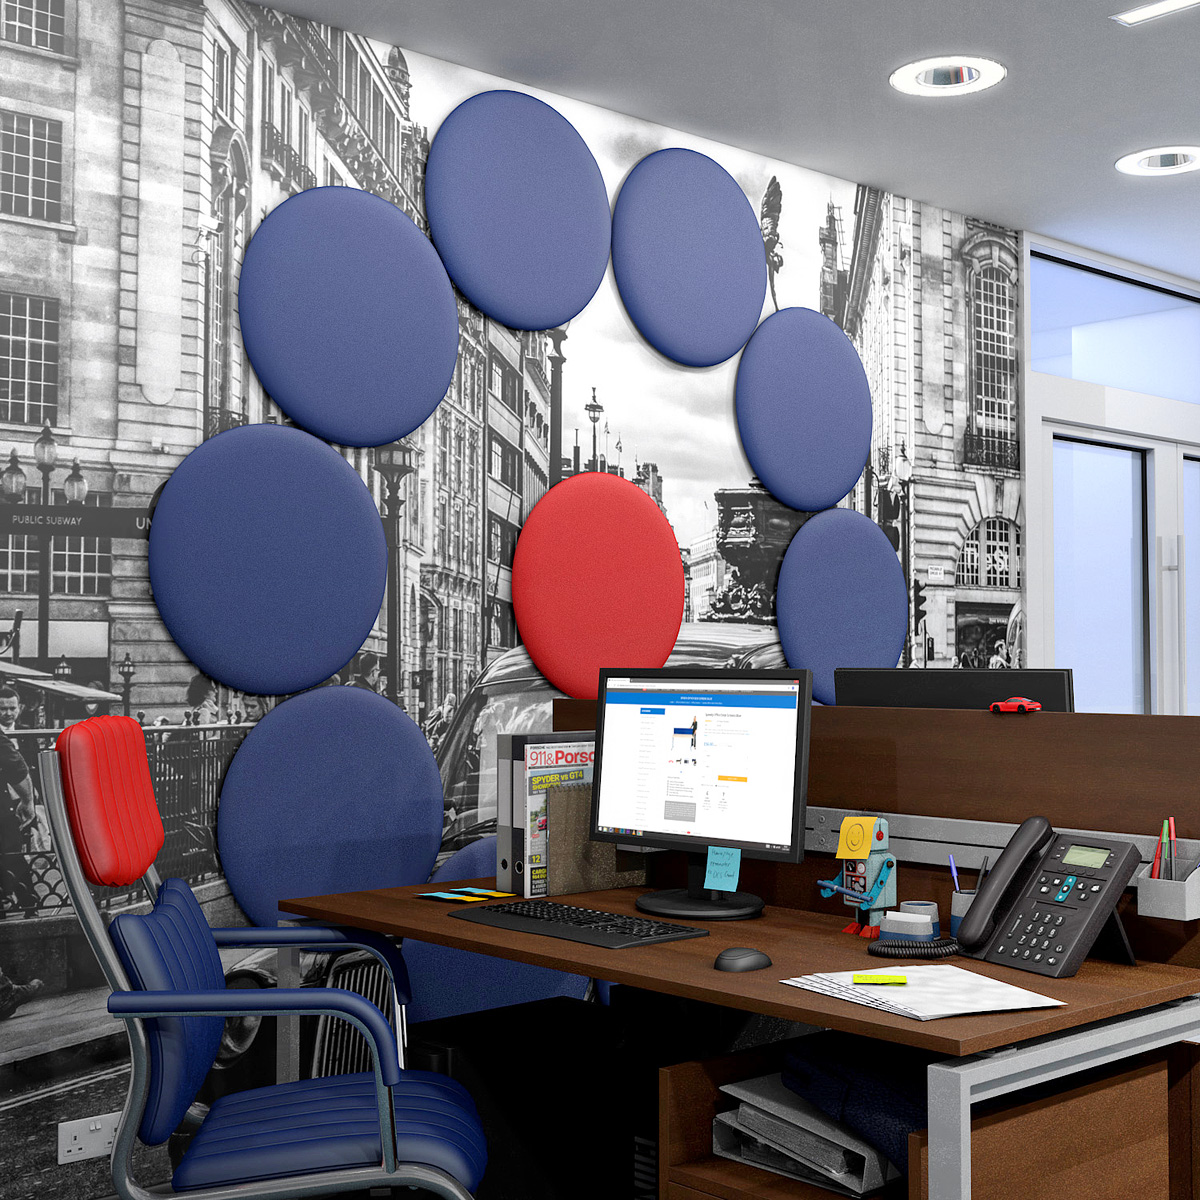 CARRERA™ Circular Acoustic Wall Tiles Have High Quality Sound Absorbing Qualities For Reducing Office Noise